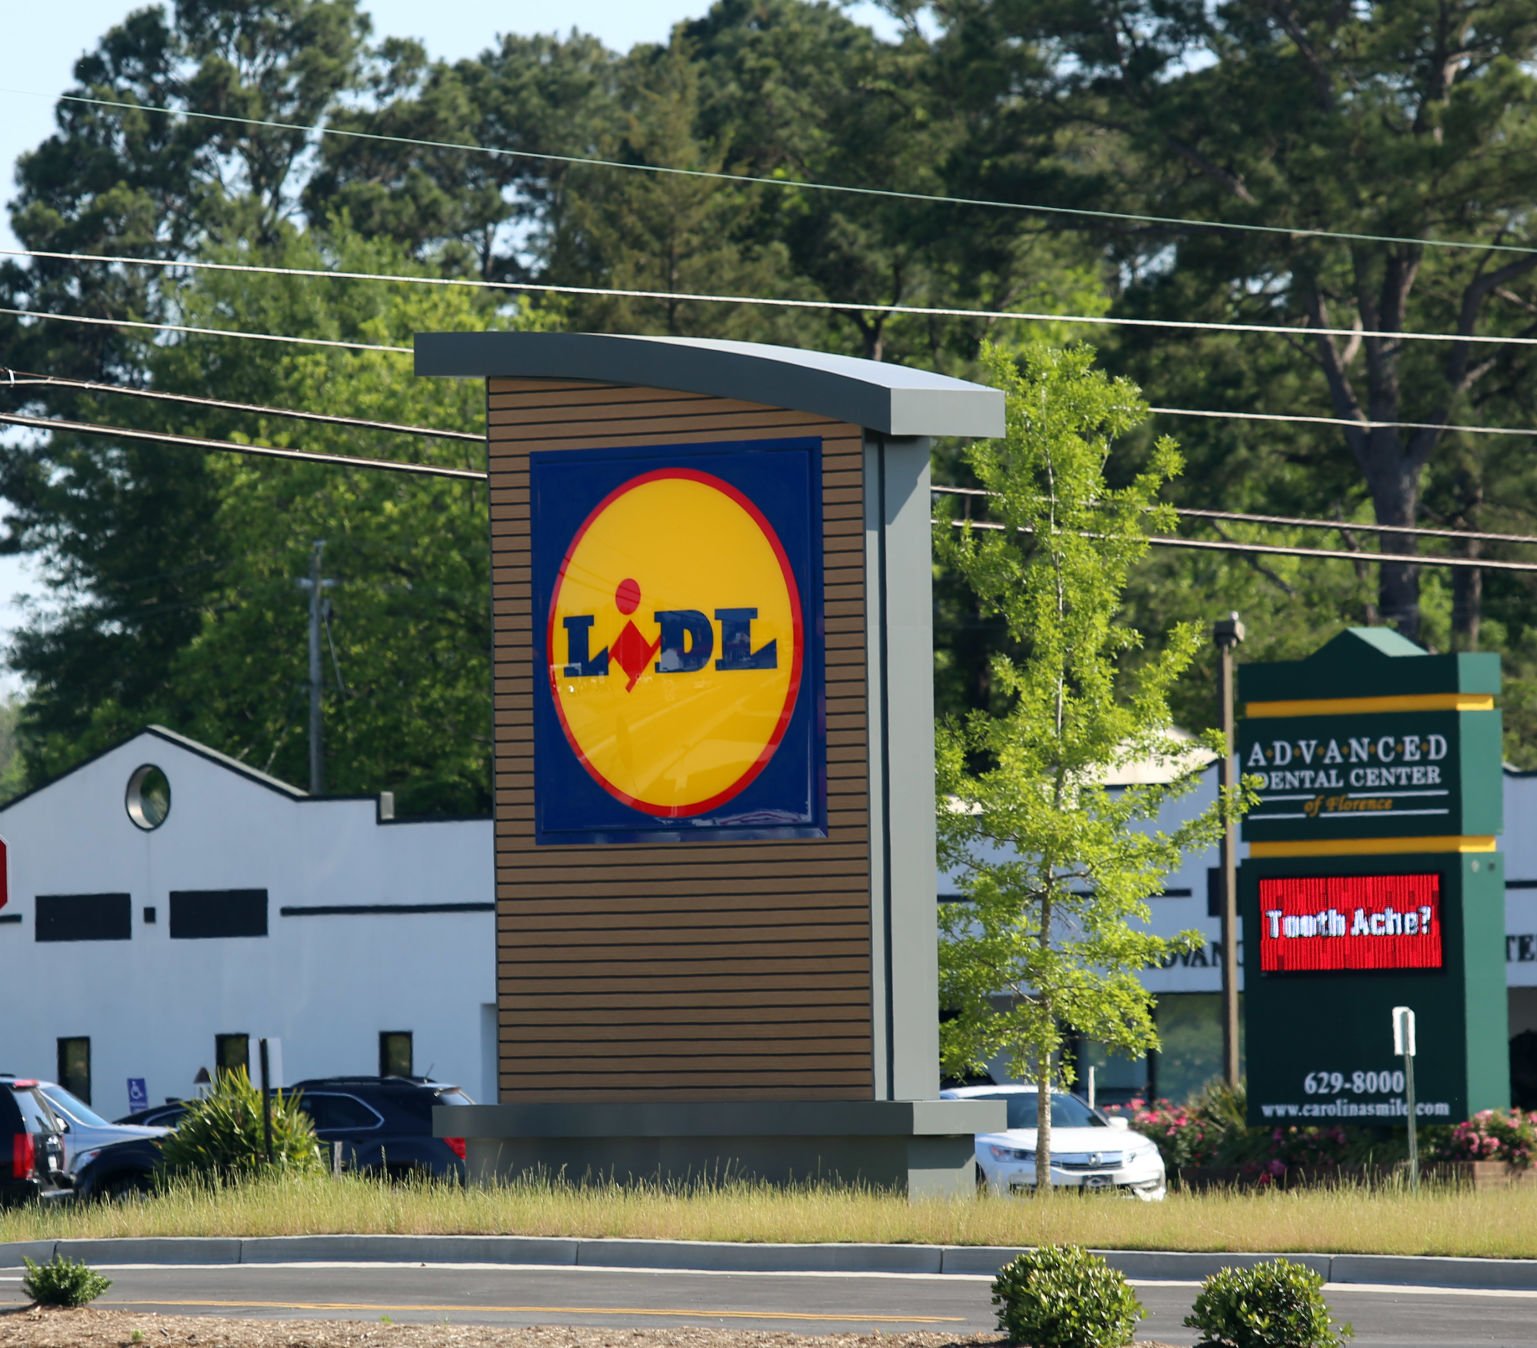 How To Pronounce Lidl In Us All information about Service